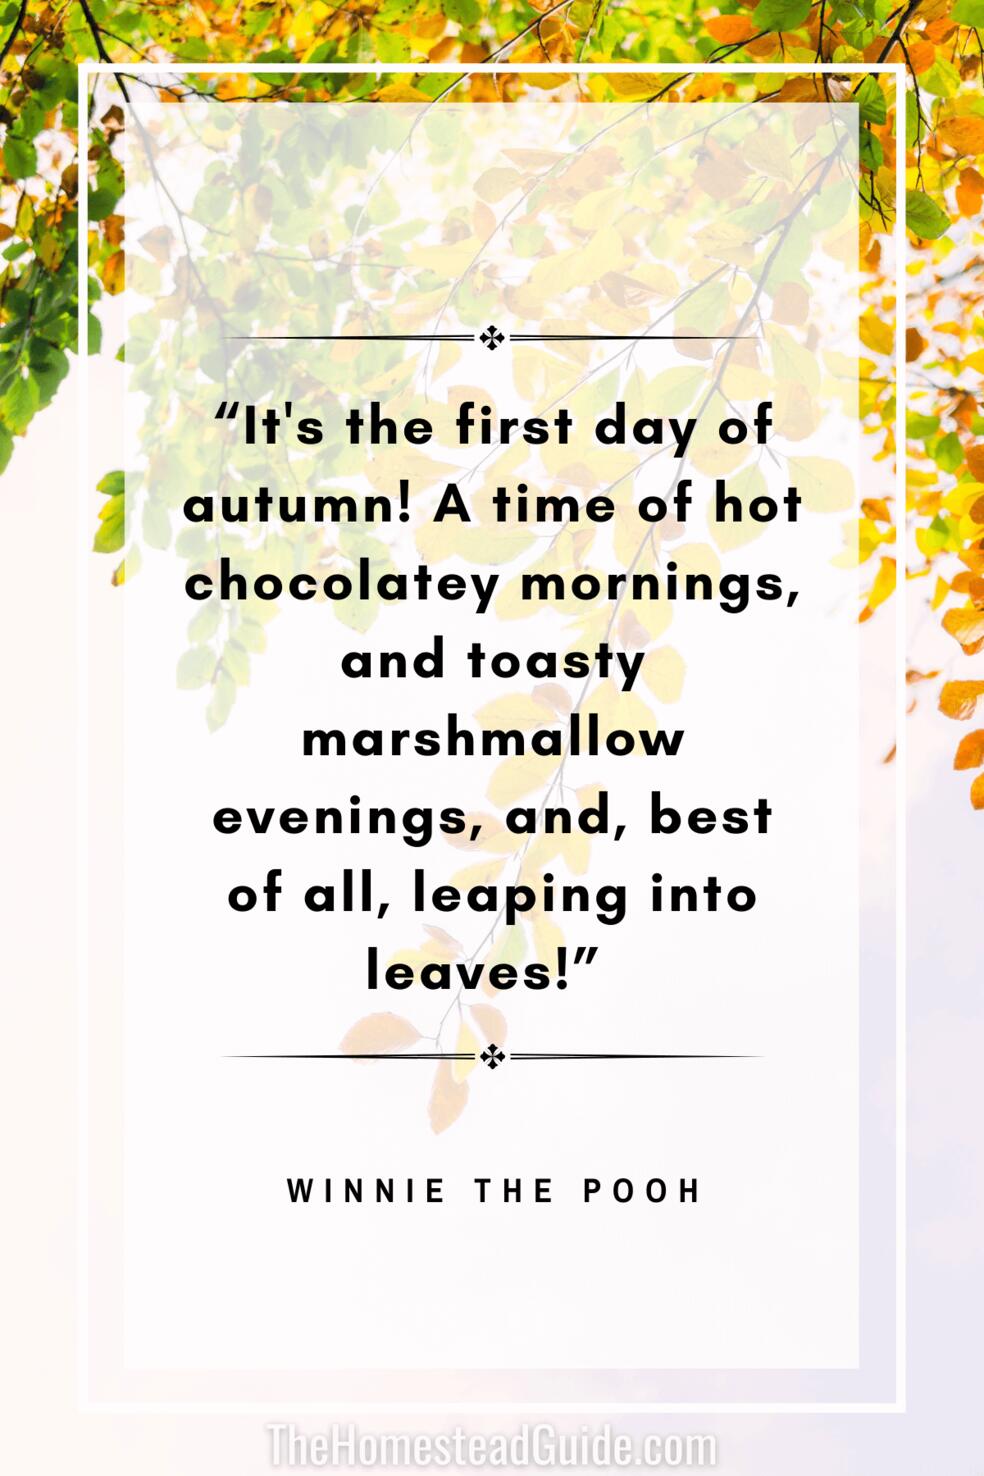 Its the first day of autumn! A time of hot chocolatey mornings, and toasty marshmallow evenings, and, best of all, leaping into leaves!